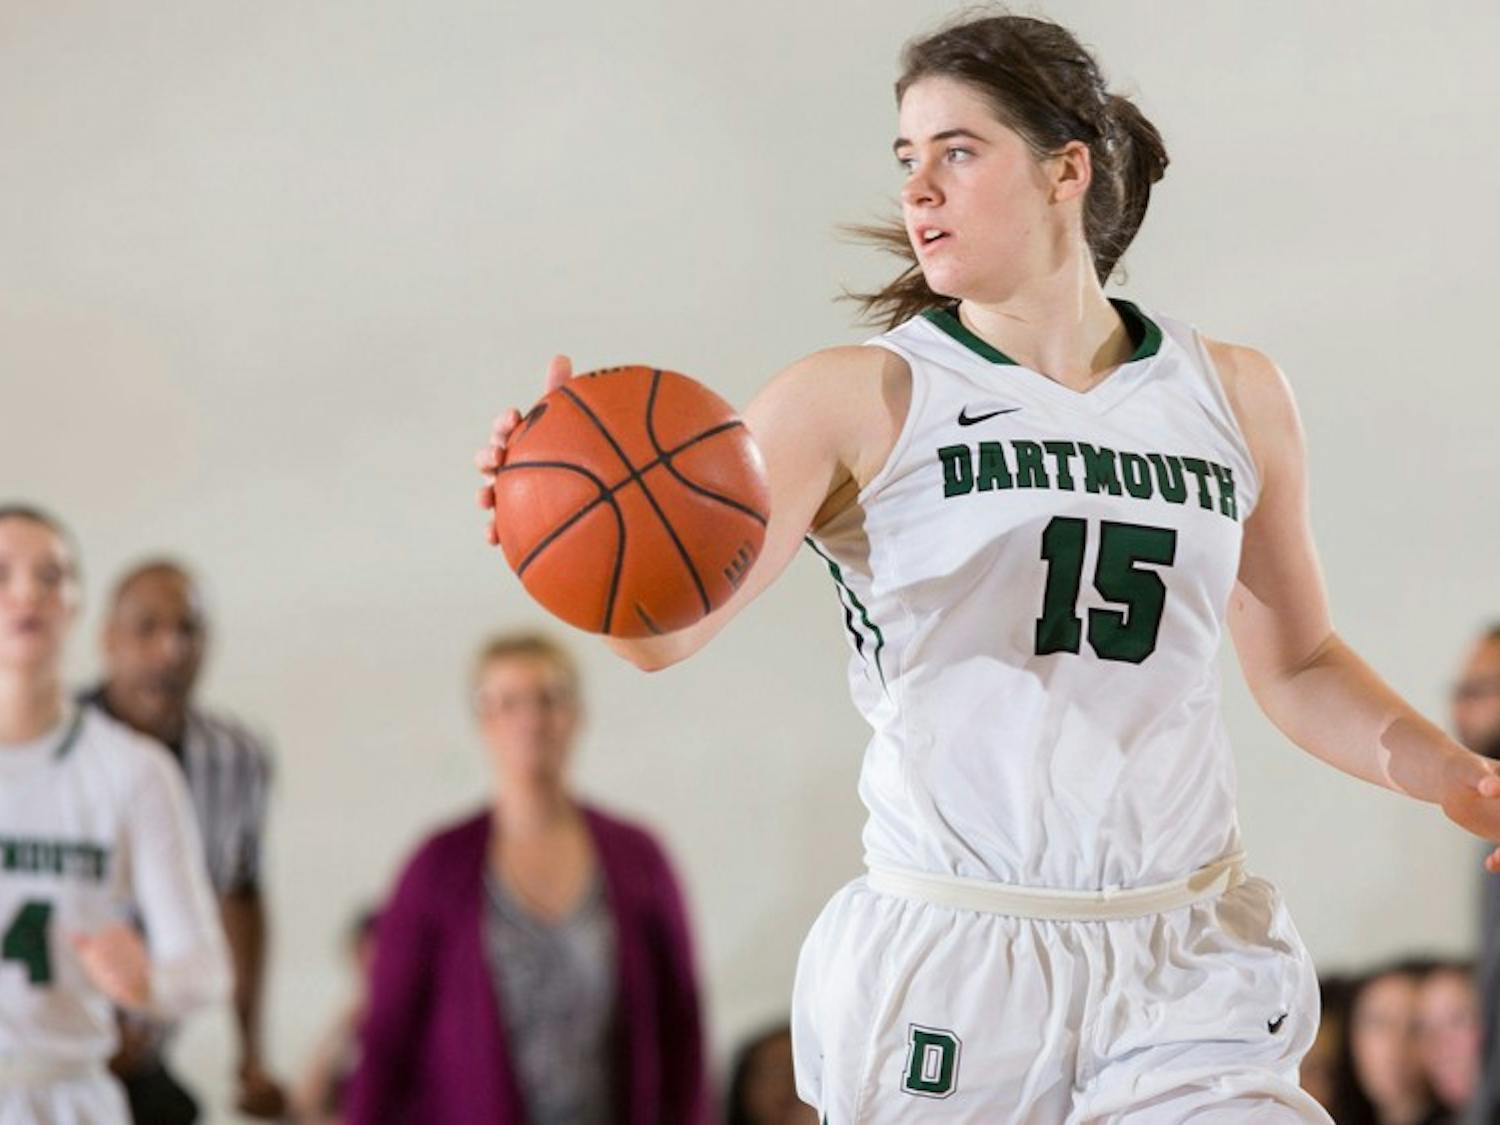 As the only senior on the women's basketball team, Fanni Szabo '17 has taken a leadership role both on and off the court.